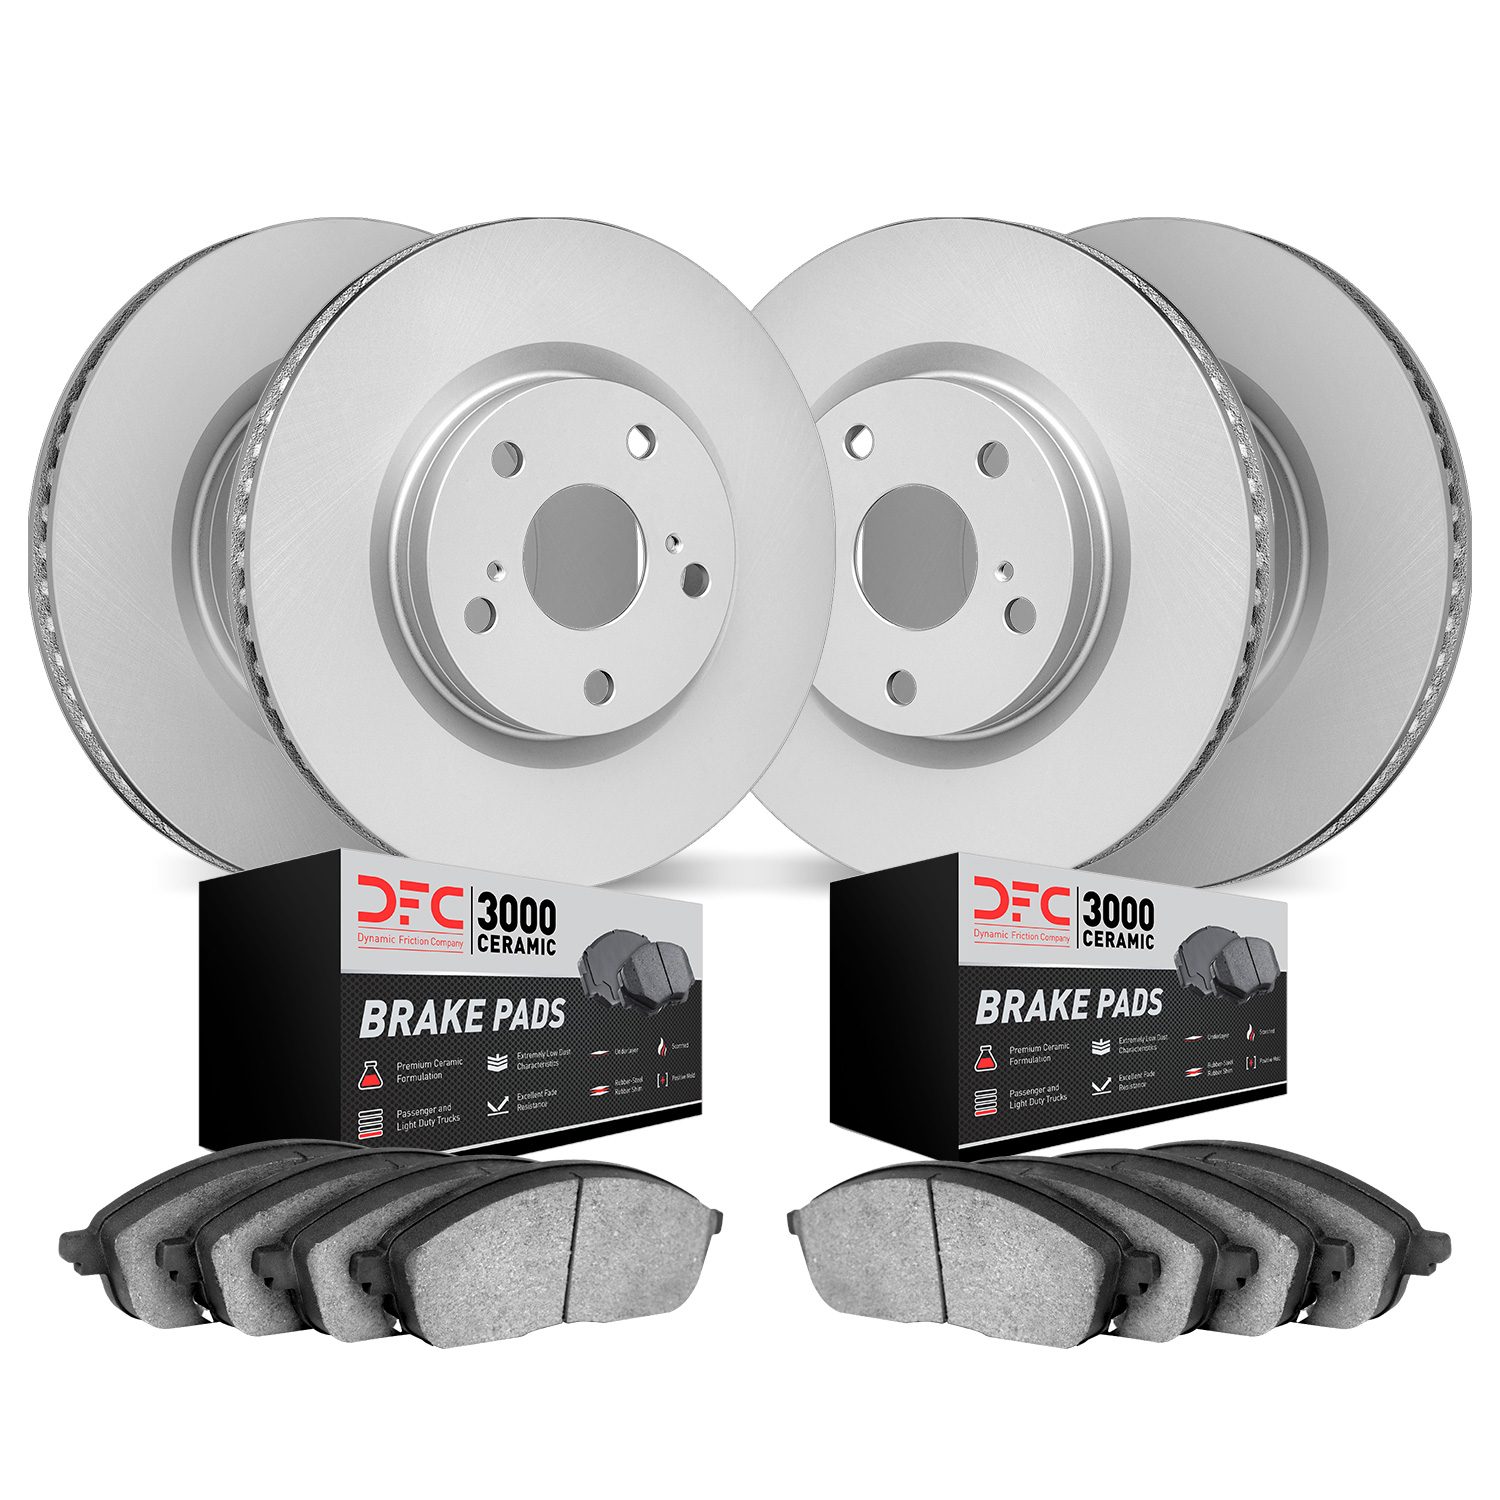 4304-11008 Geospec Brake Rotors with 3000-Series Ceramic Brake Pads Kit, 2010-2013 Land Rover, Position: Front and Rear